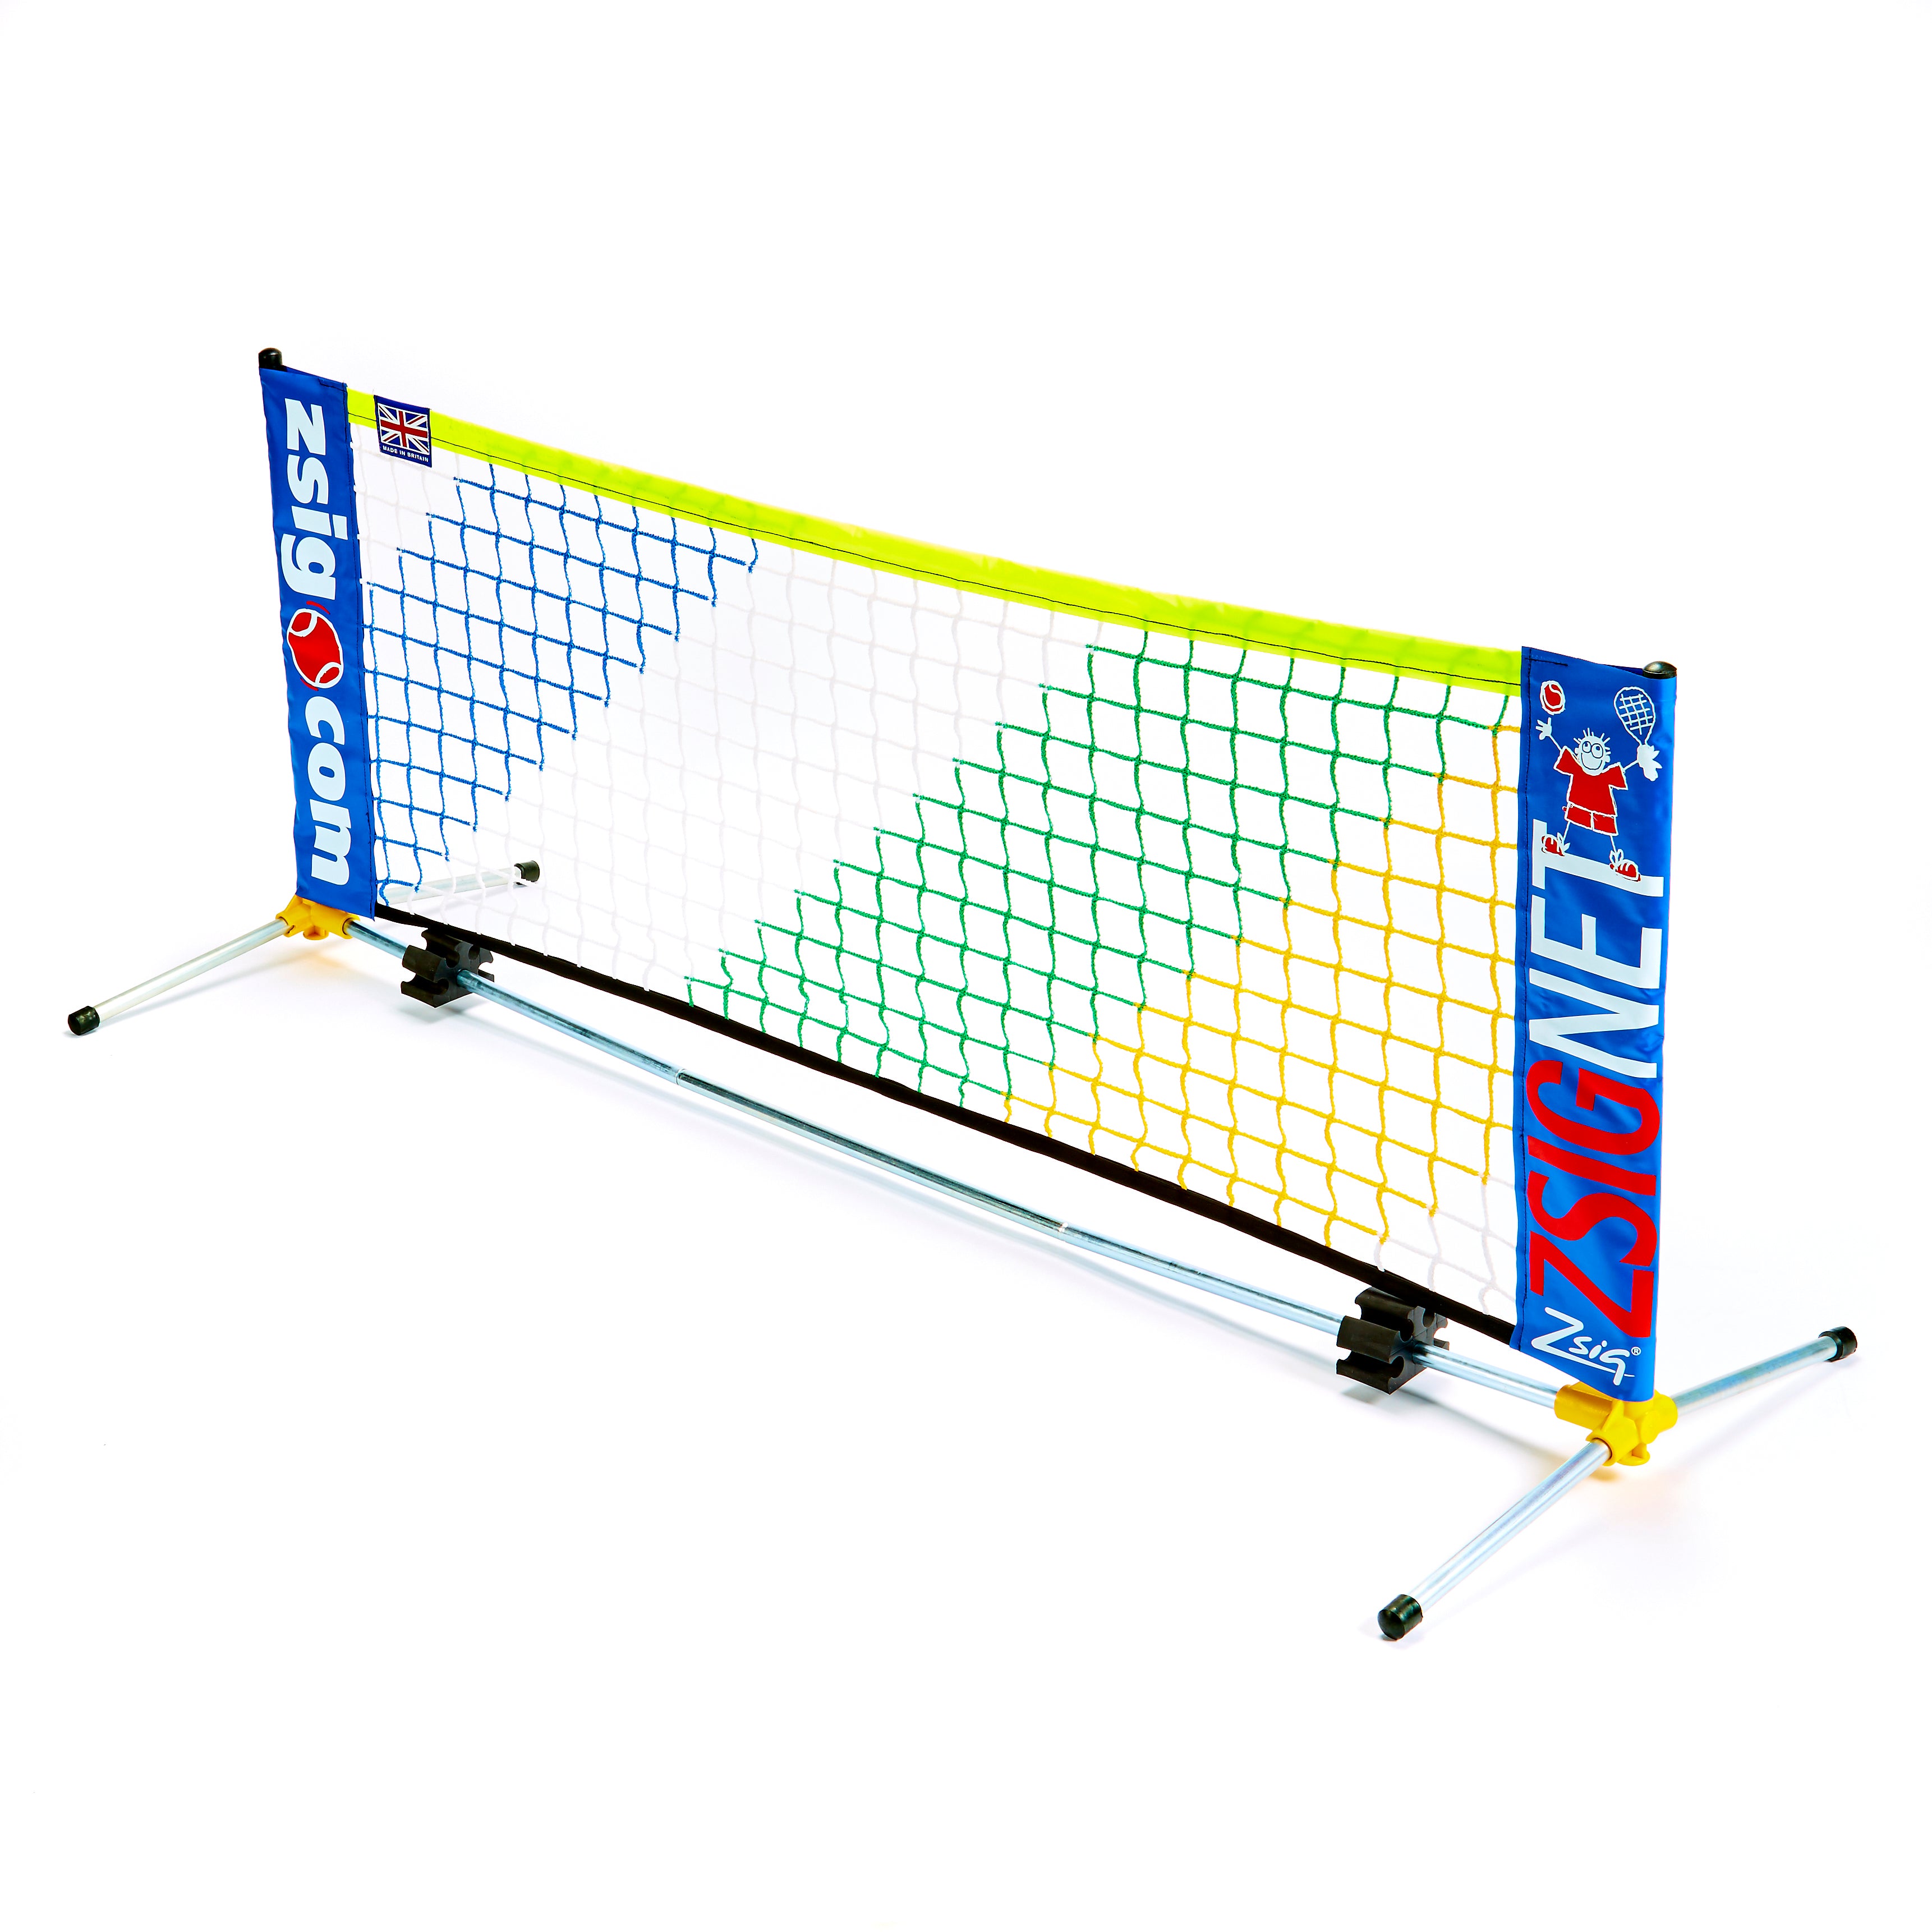 Early Years 1.8m Mini Tennis Net with limited edition rainbow netting